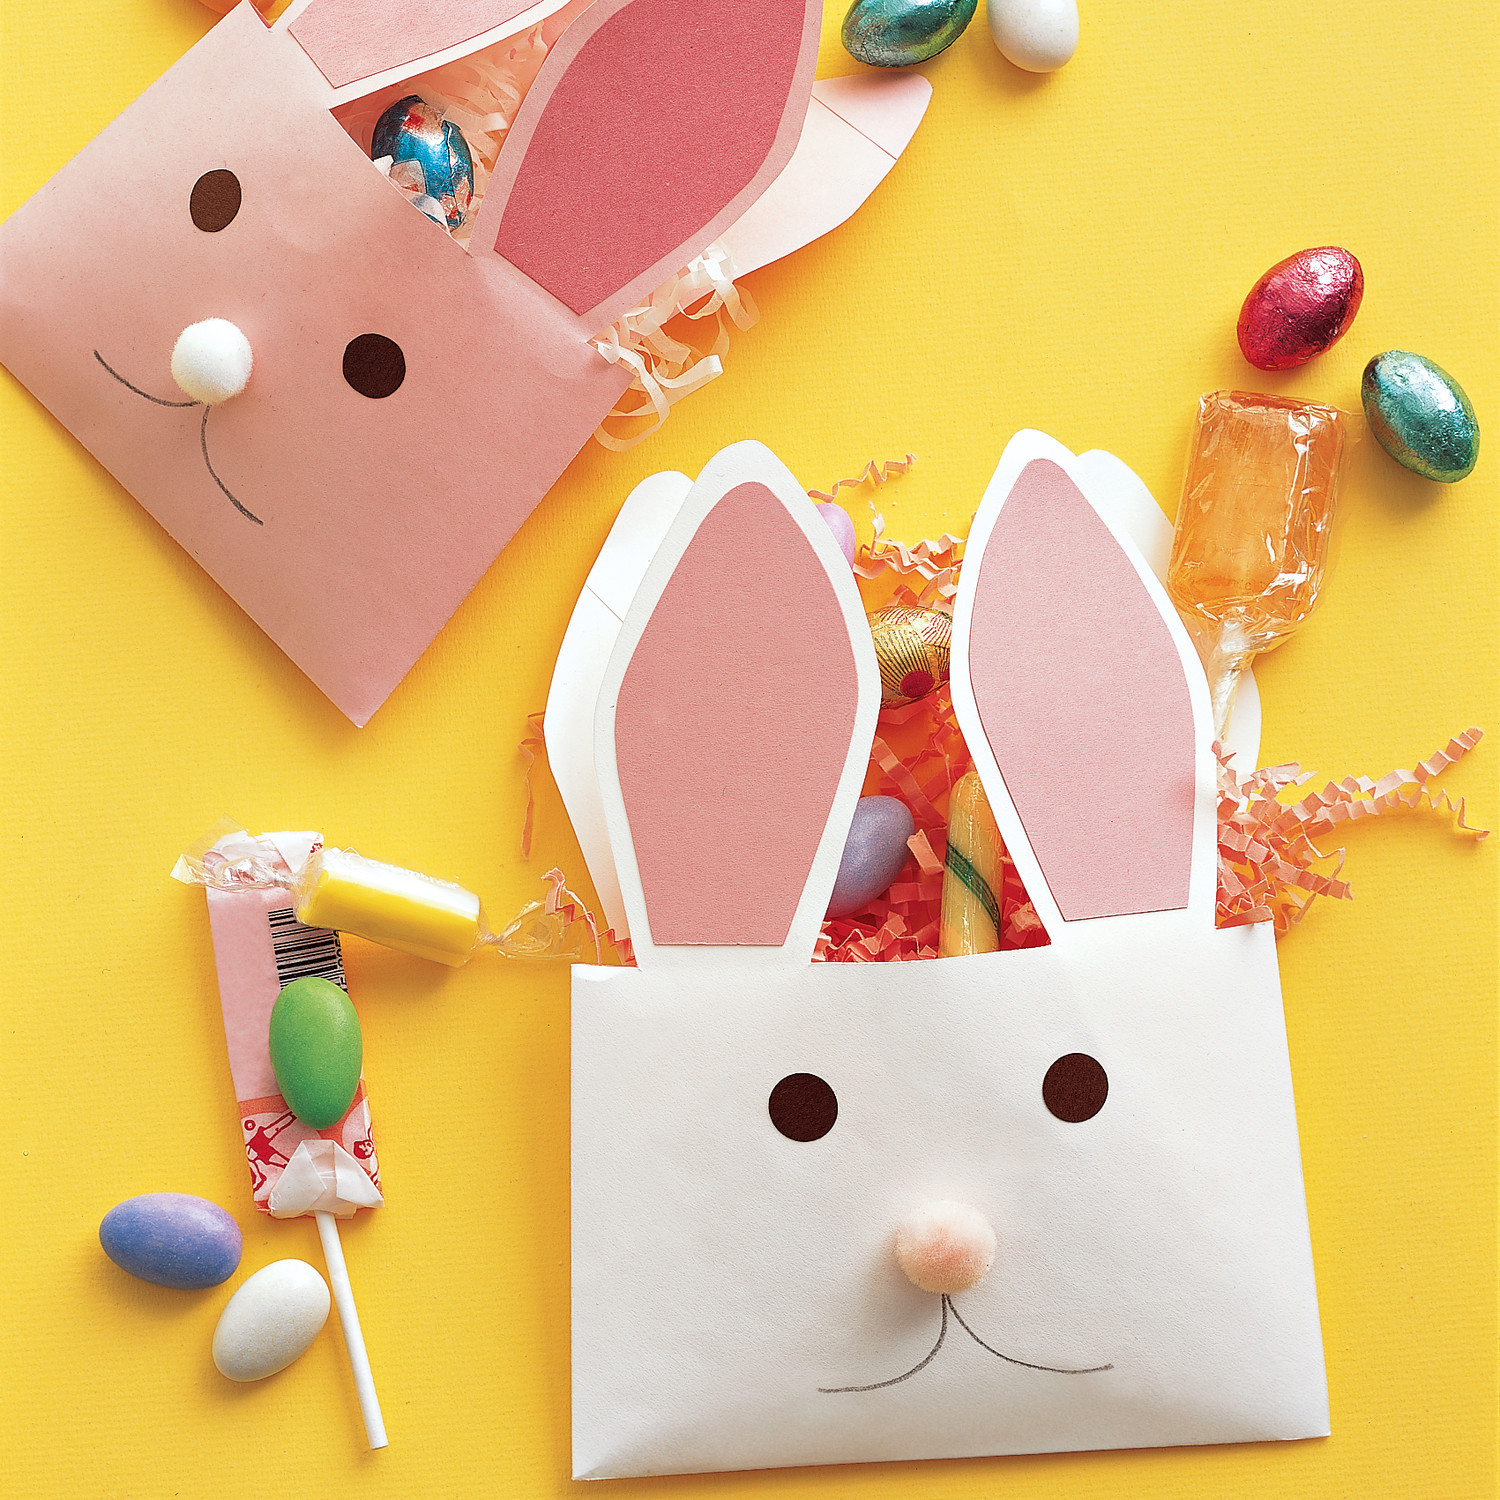 Crafts To Make For Kids
 The Best Easter Crafts and Activities for Kids